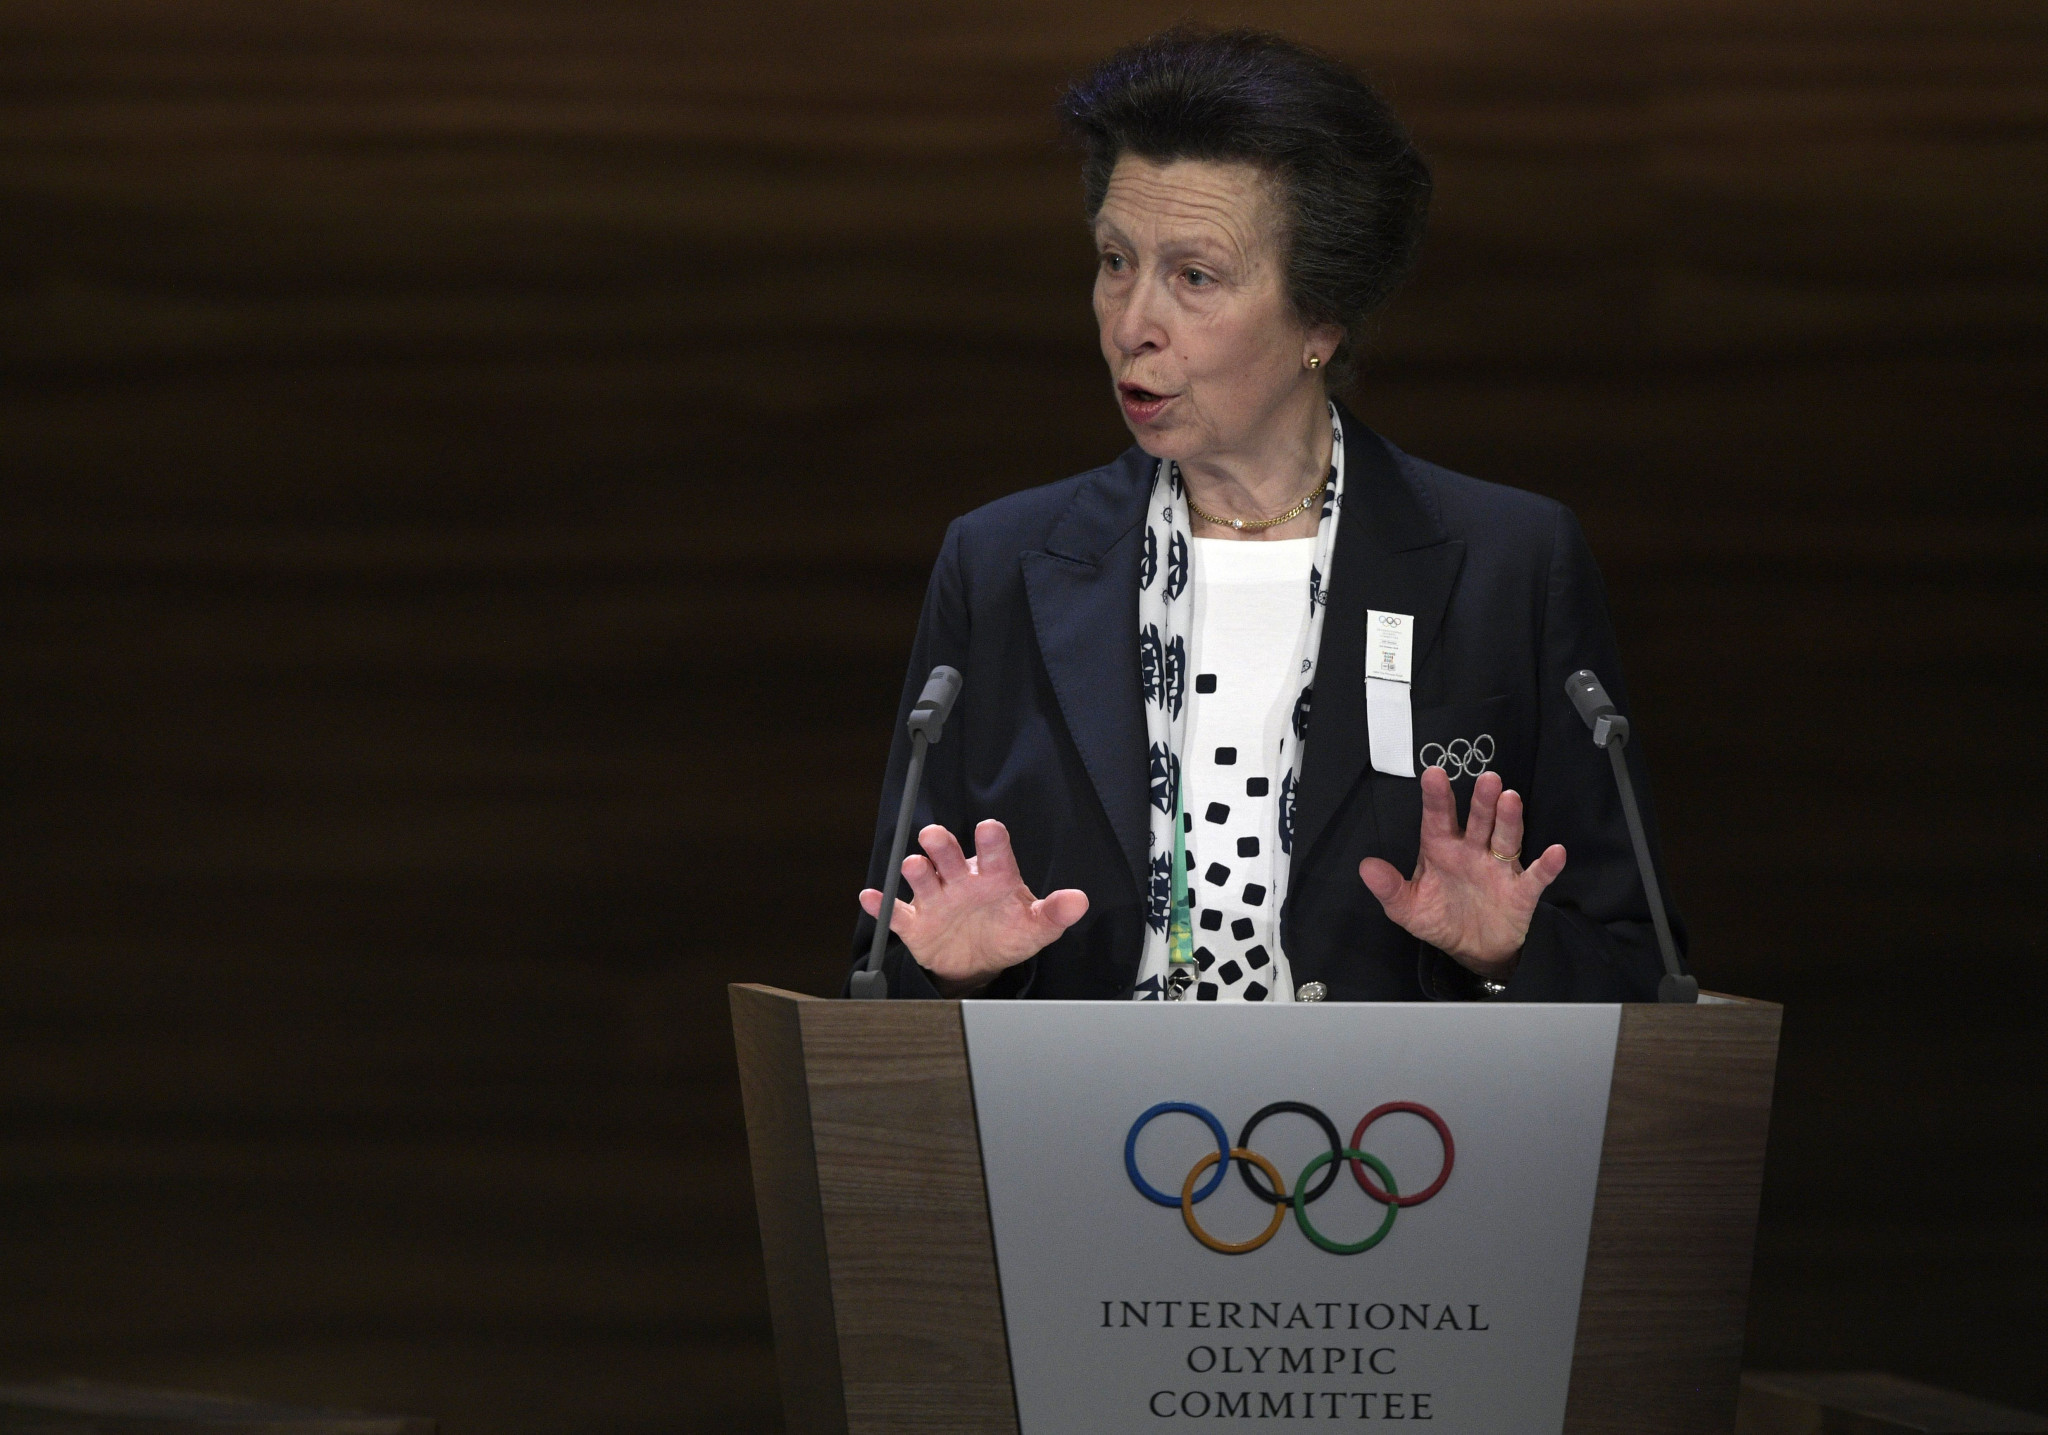 The Princess Royal, an International Olympic Committee member, is patron of The Eric Liddell 100 ©Getty Images